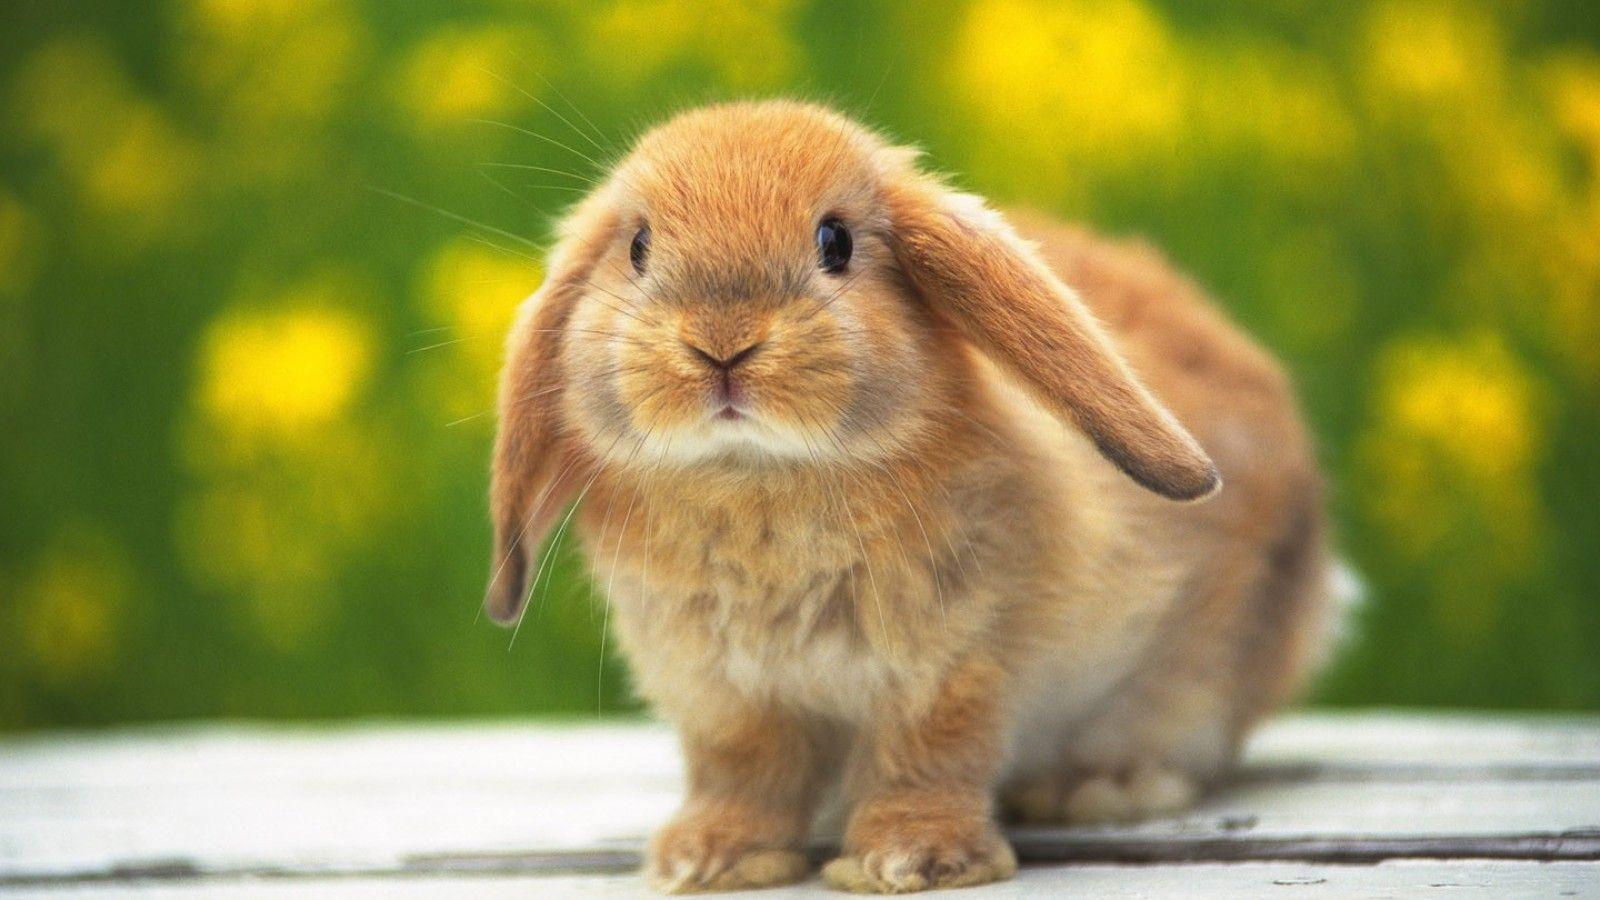 image For > Cute Bunnies Wallpaper